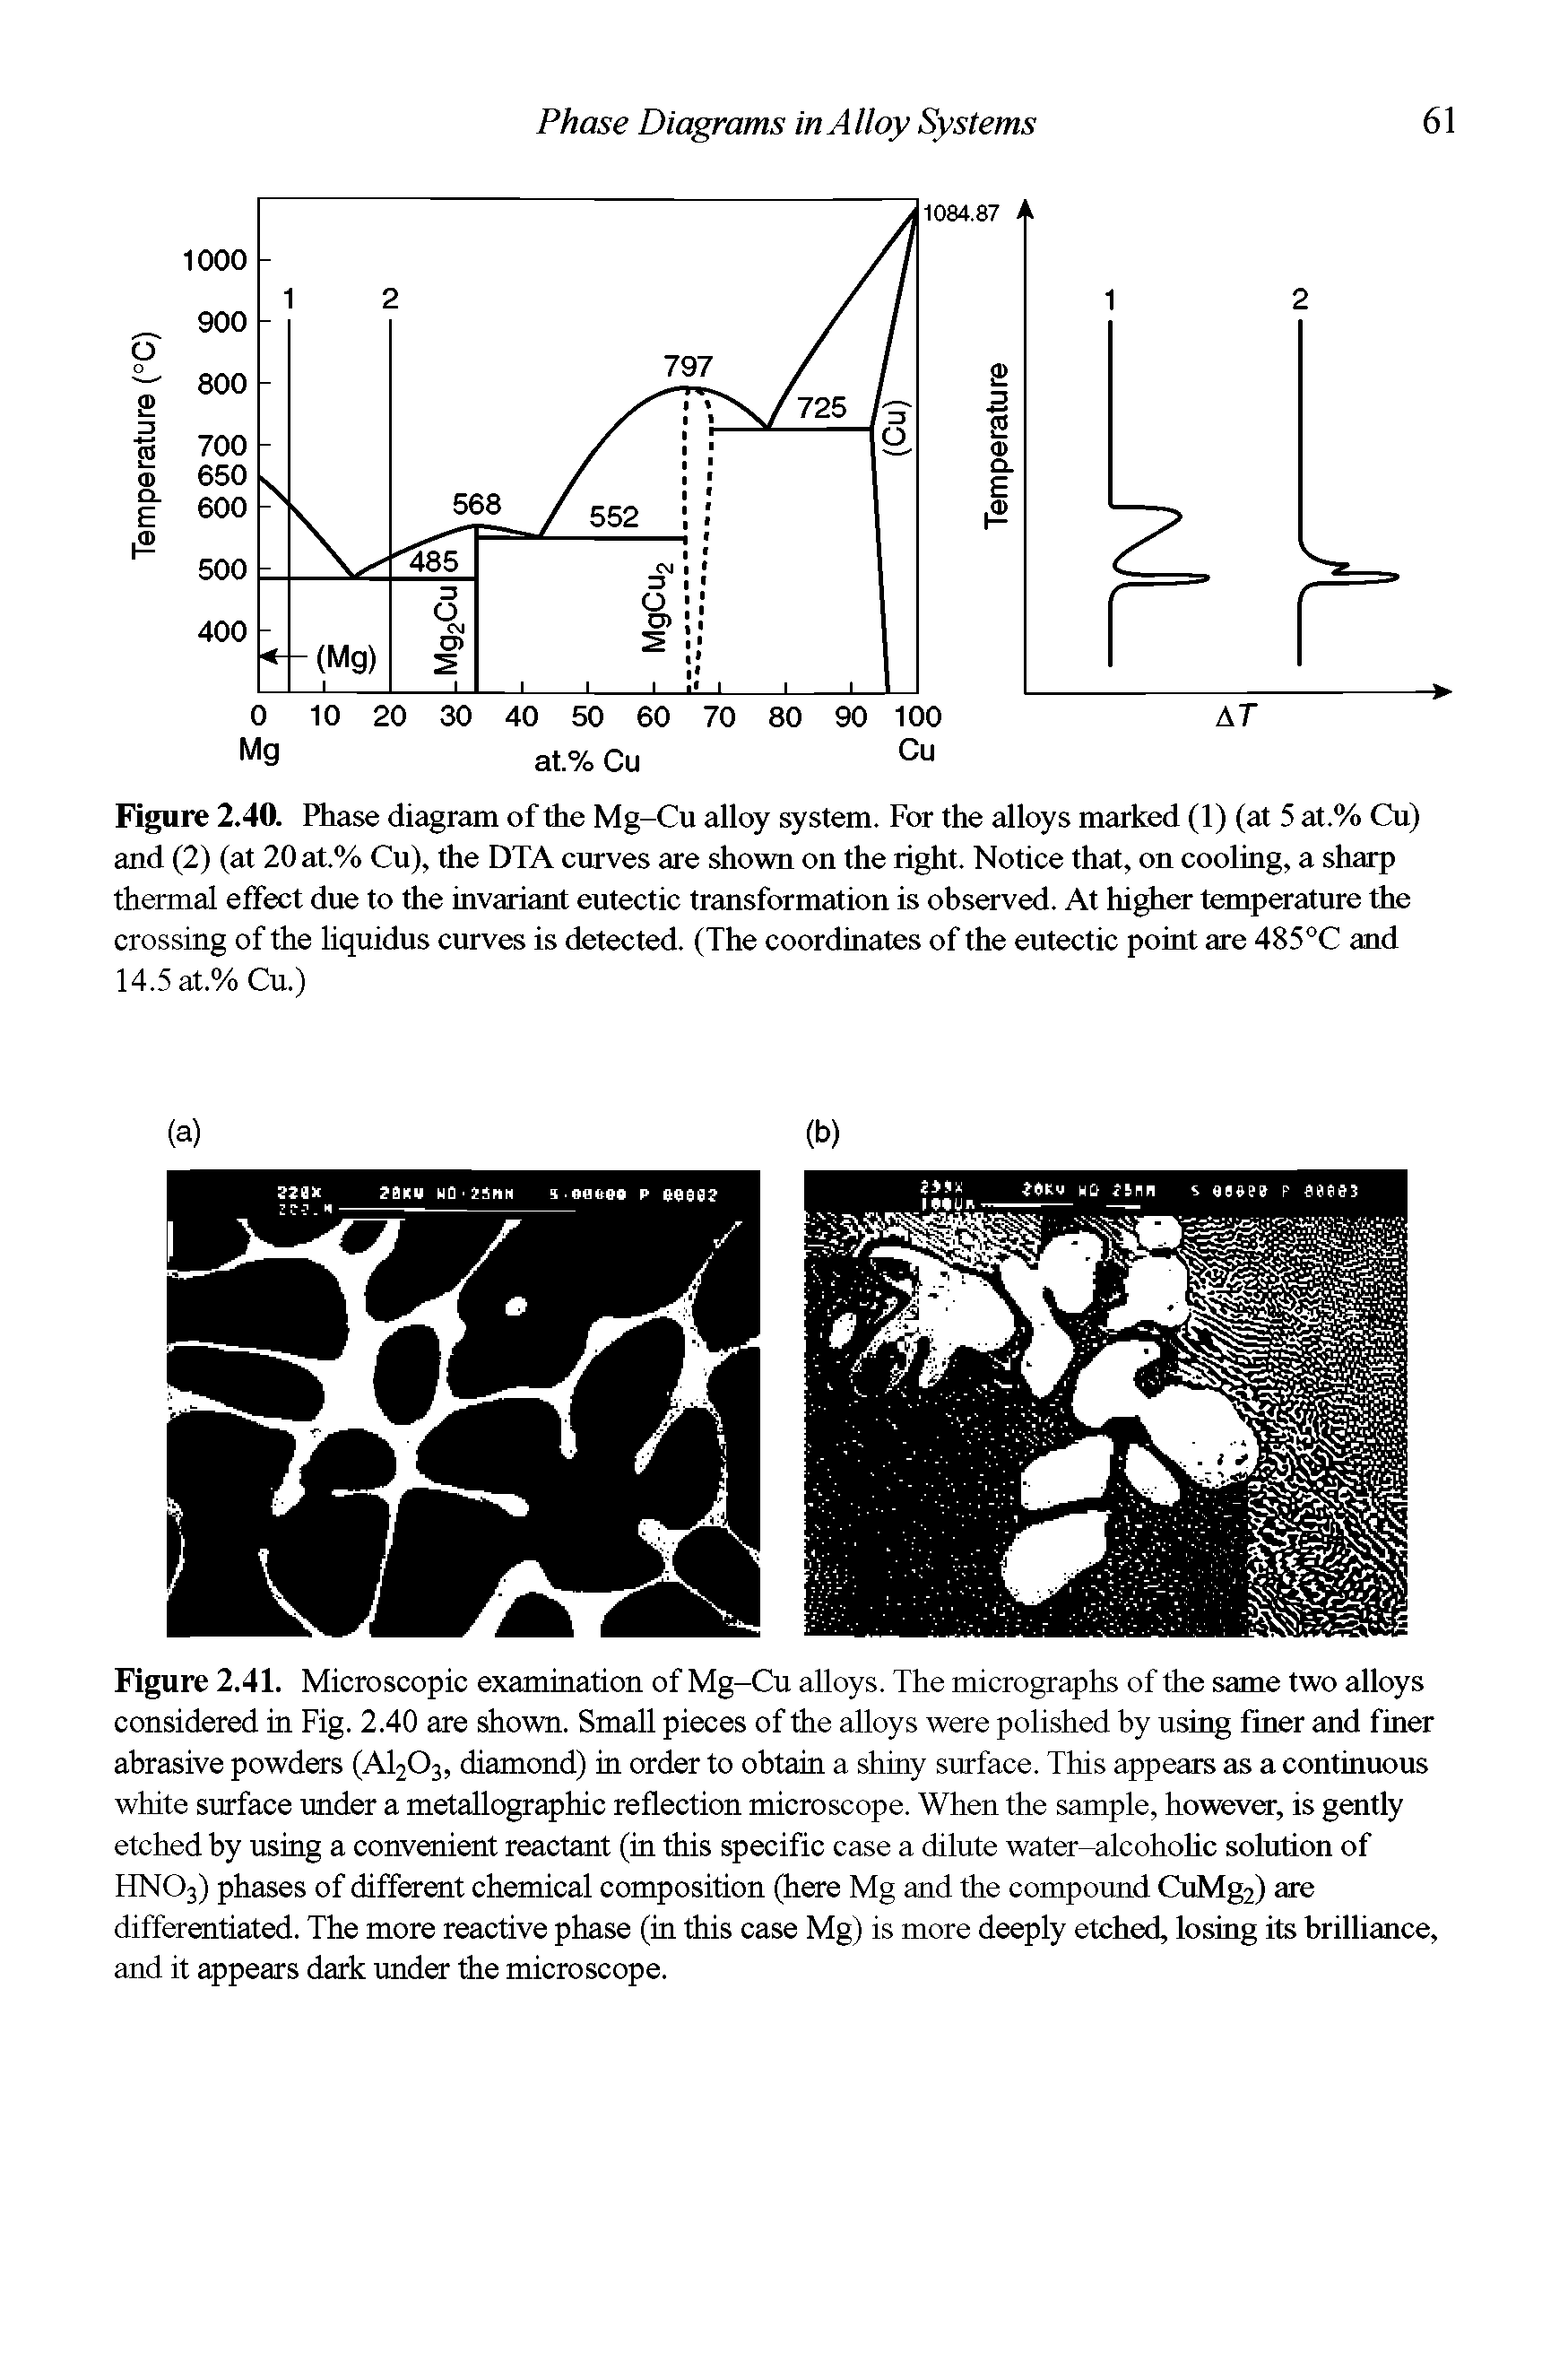 Figure 2.41. Microscopic examination of Mg-Cu alloys. The micrographs of the same two alloys considered in Fig. 2.40 are shown. Small pieces of the alloys were polished by using finer and finer abrasive powders (A1203, diamond) in order to obtain a shiny surface. This appears as a continuous white surface under a metallographic reflection microscope. When the sample, however, is gently etched by using a convenient reactant (in this specific case a dilute water-alcohohc solution of HN03) phases of different chemical composition (here Mg and the compound CuMg2) are differentiated. The more reactive phase (in this case Mg) is more deeply etched, losing its brilliance, and it appears dark under the microscope.